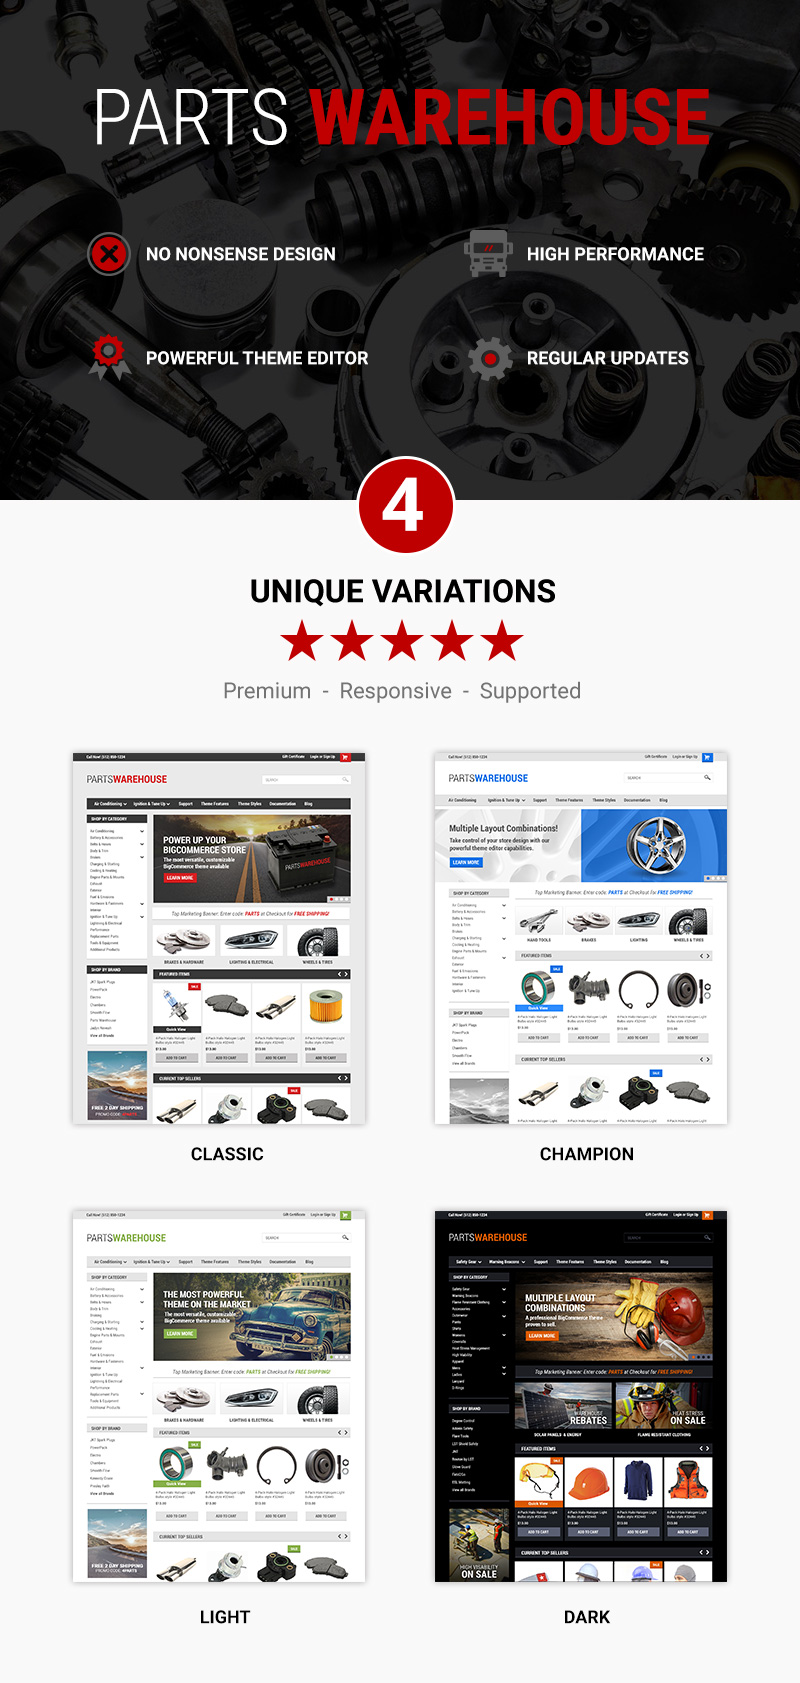 Parts Warehouse Theme Features